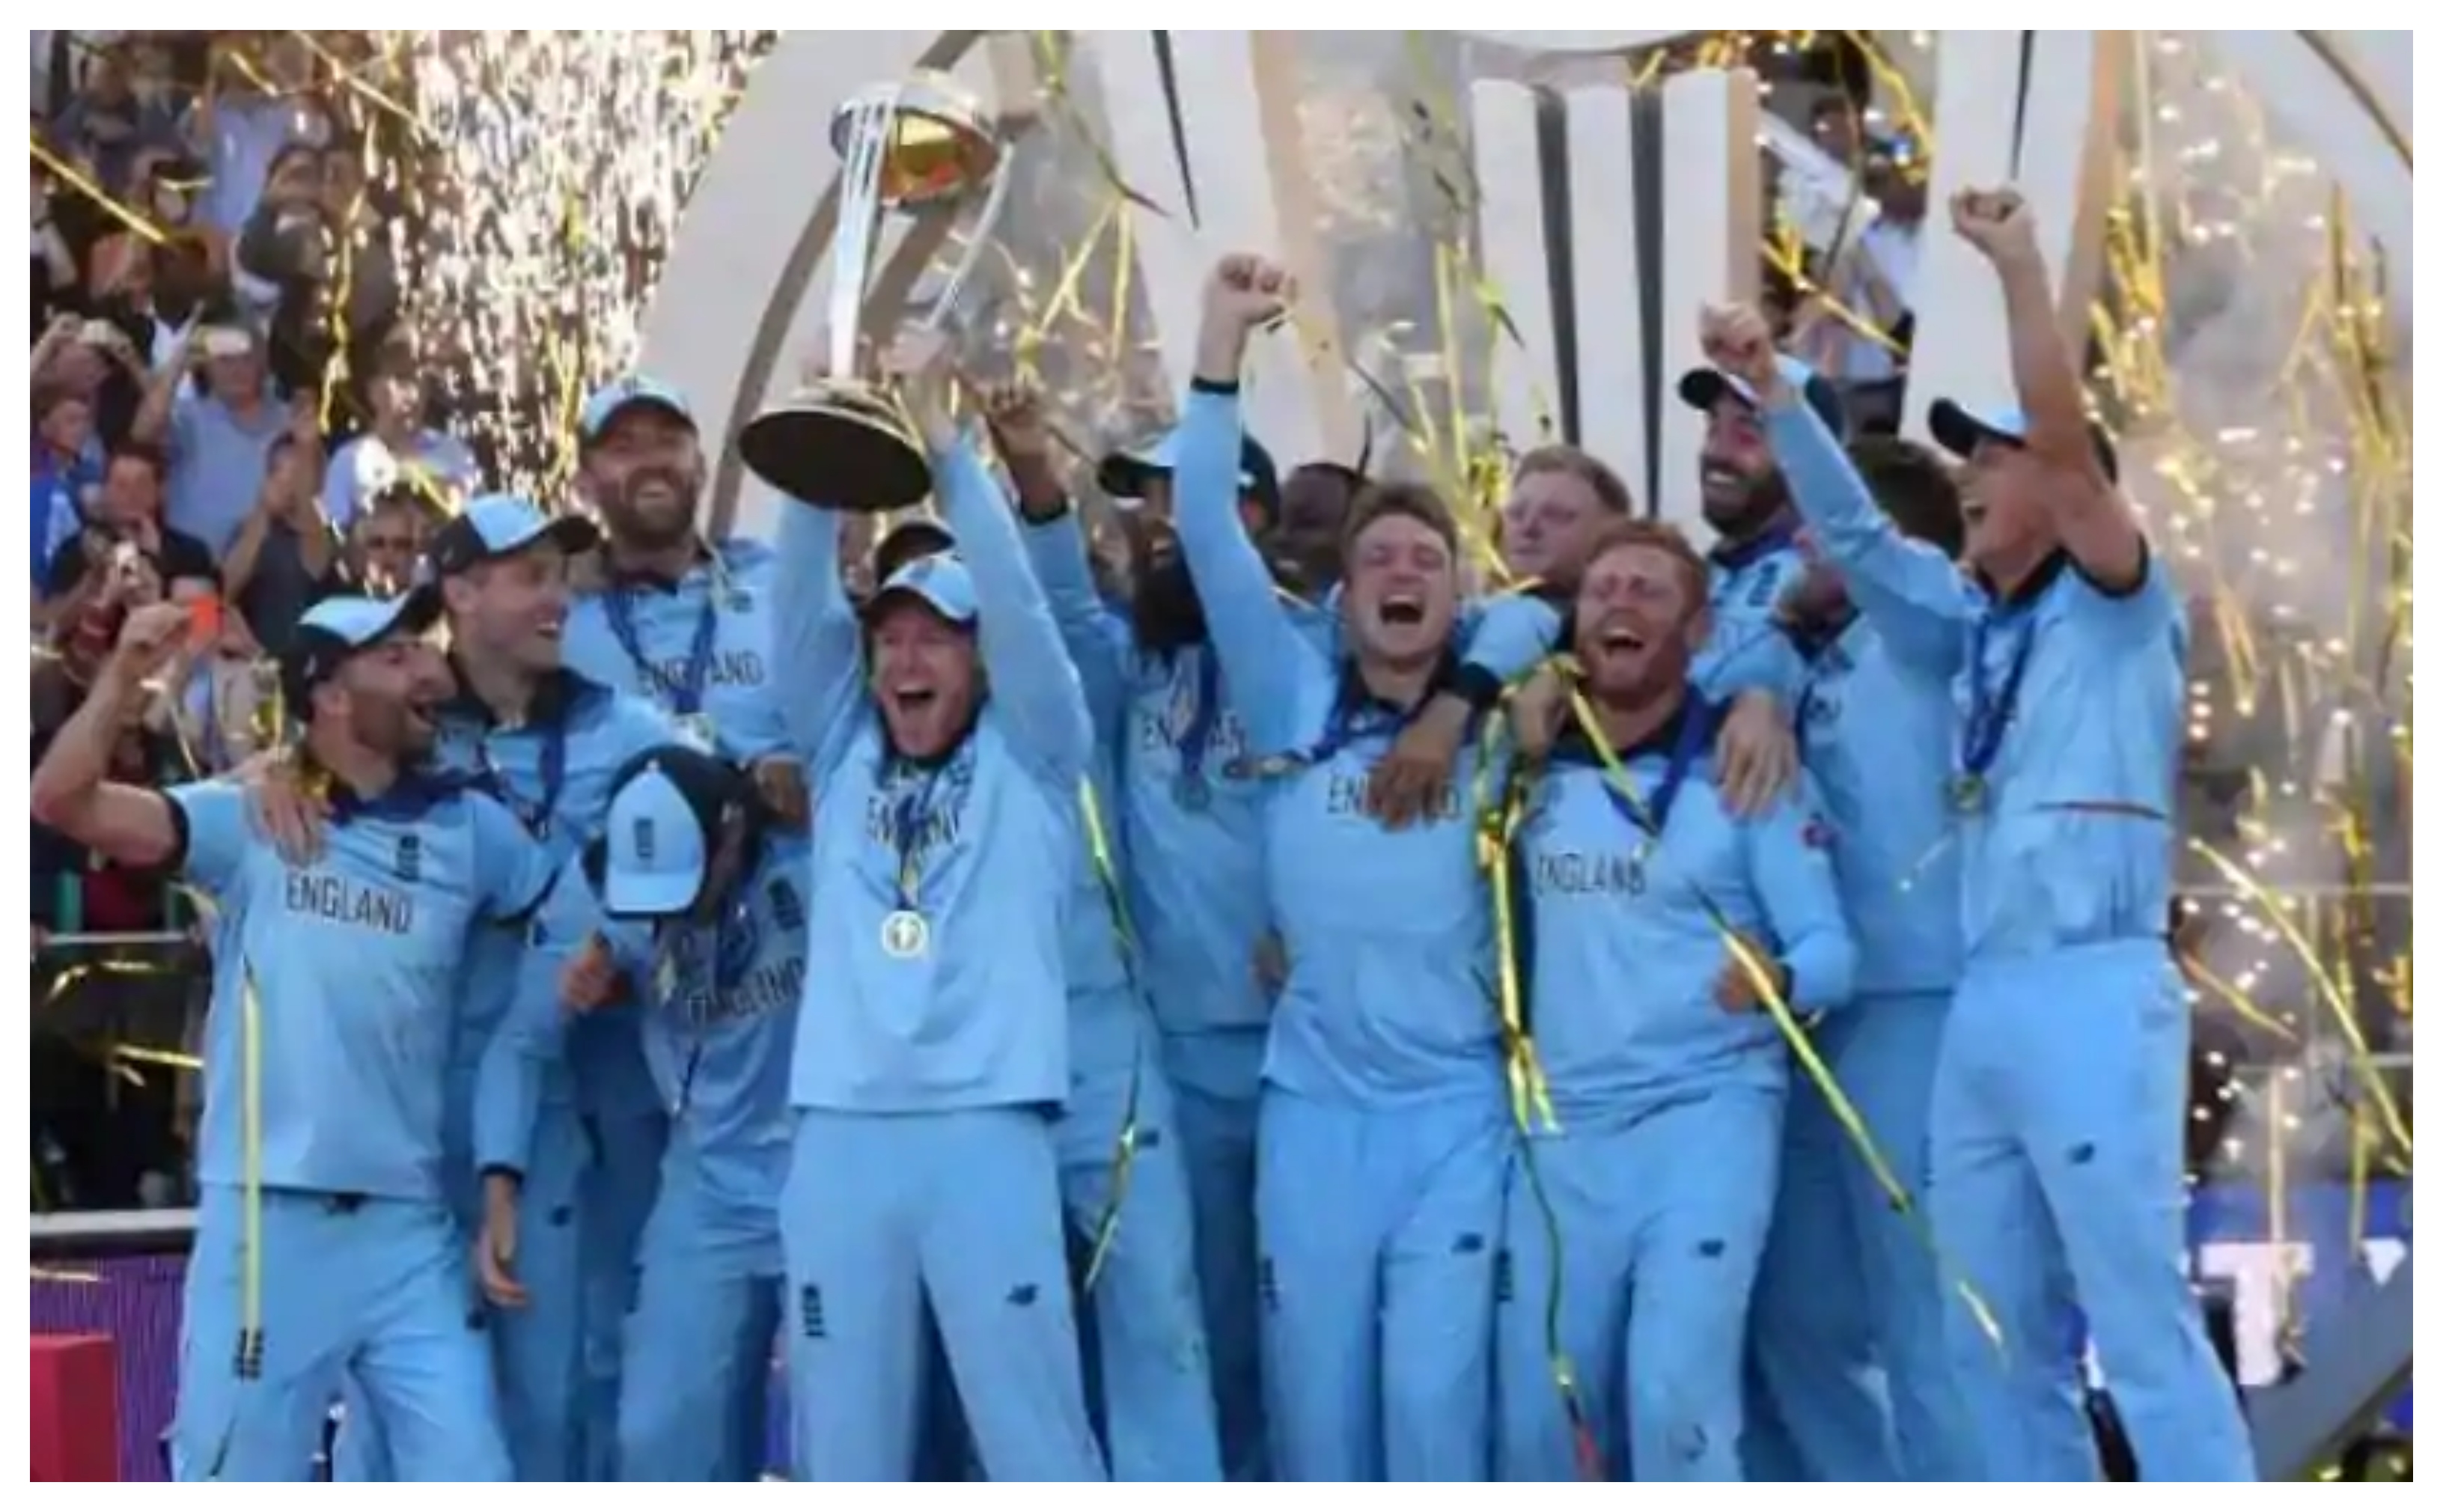 Eoin Morgan led England to 2019 World Cup victory | AFP